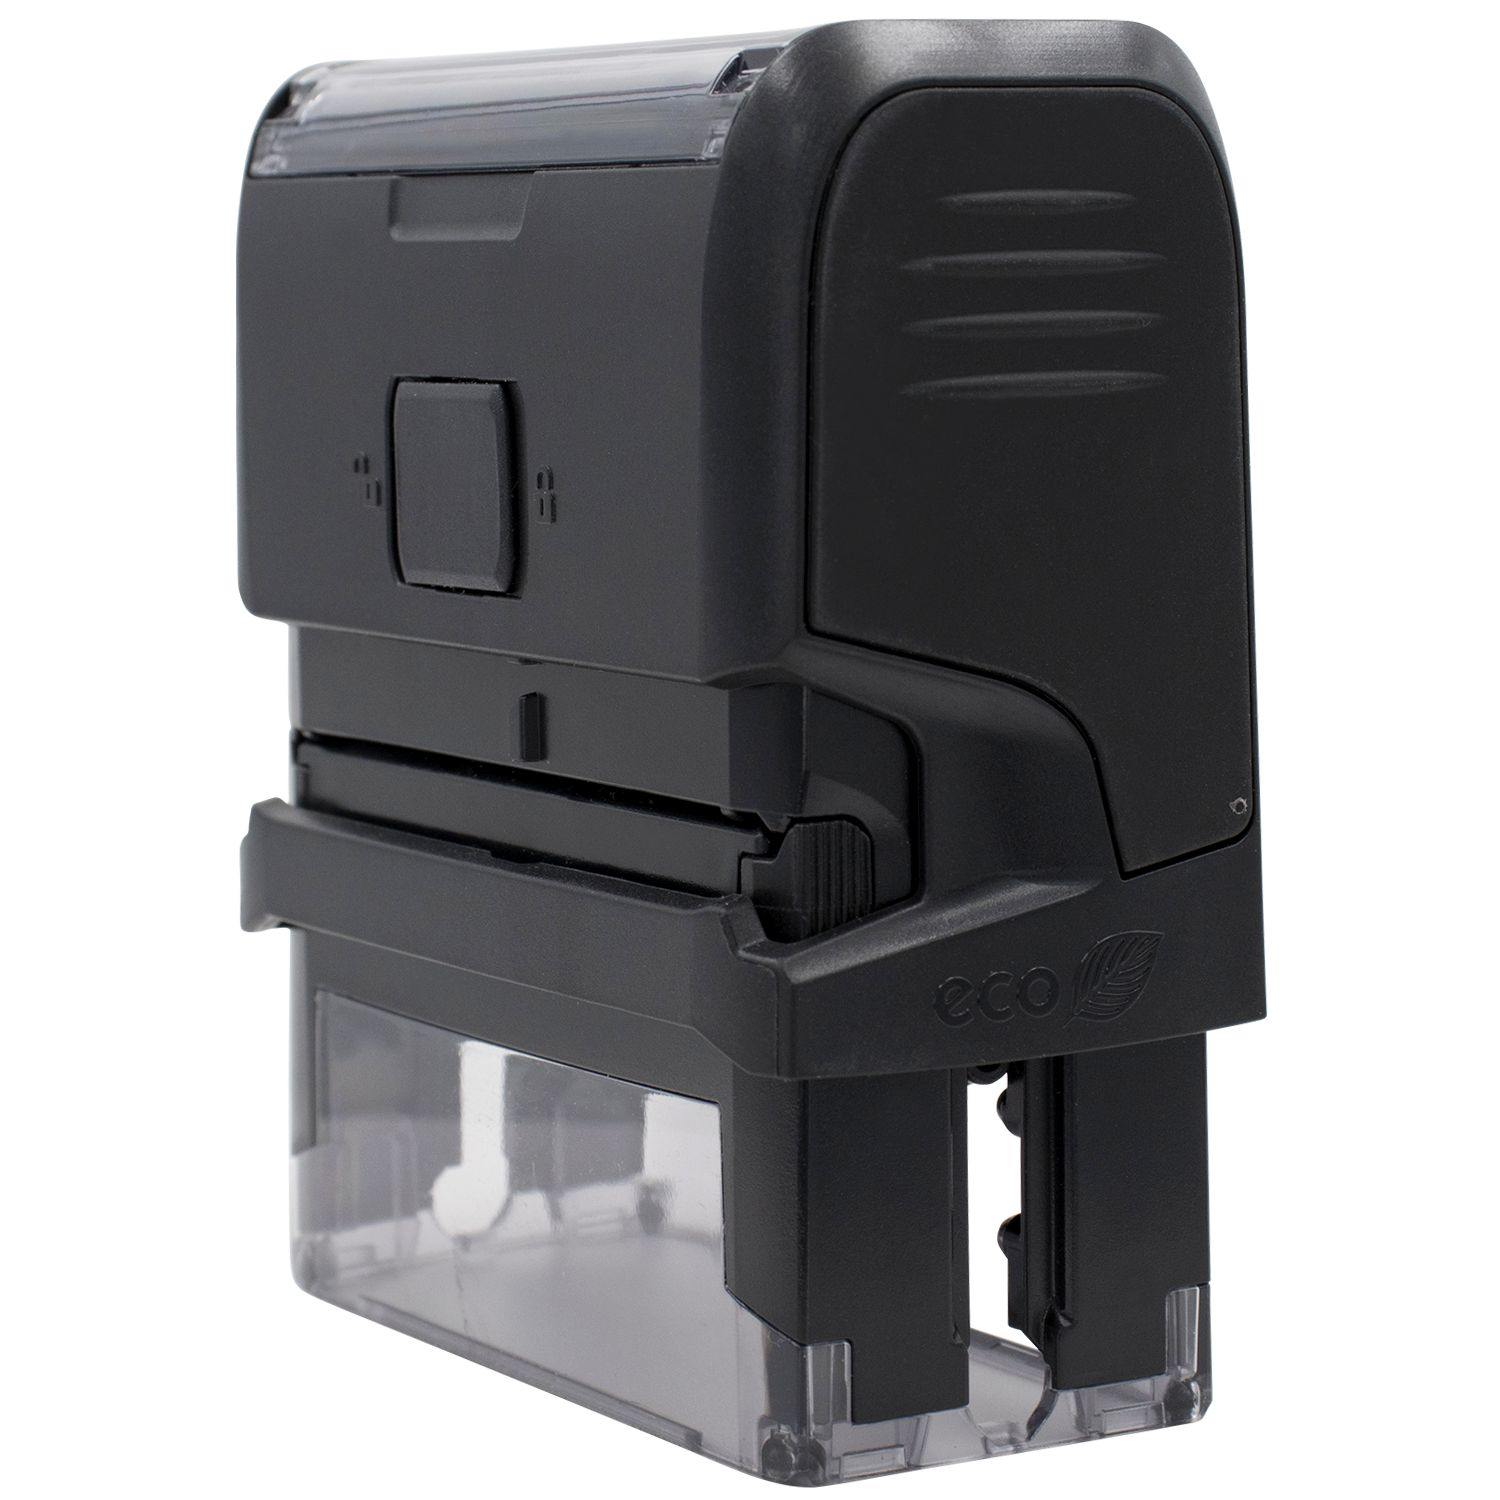 Side View of Large Self-Inking Bold Recibido Stamp at an Angle